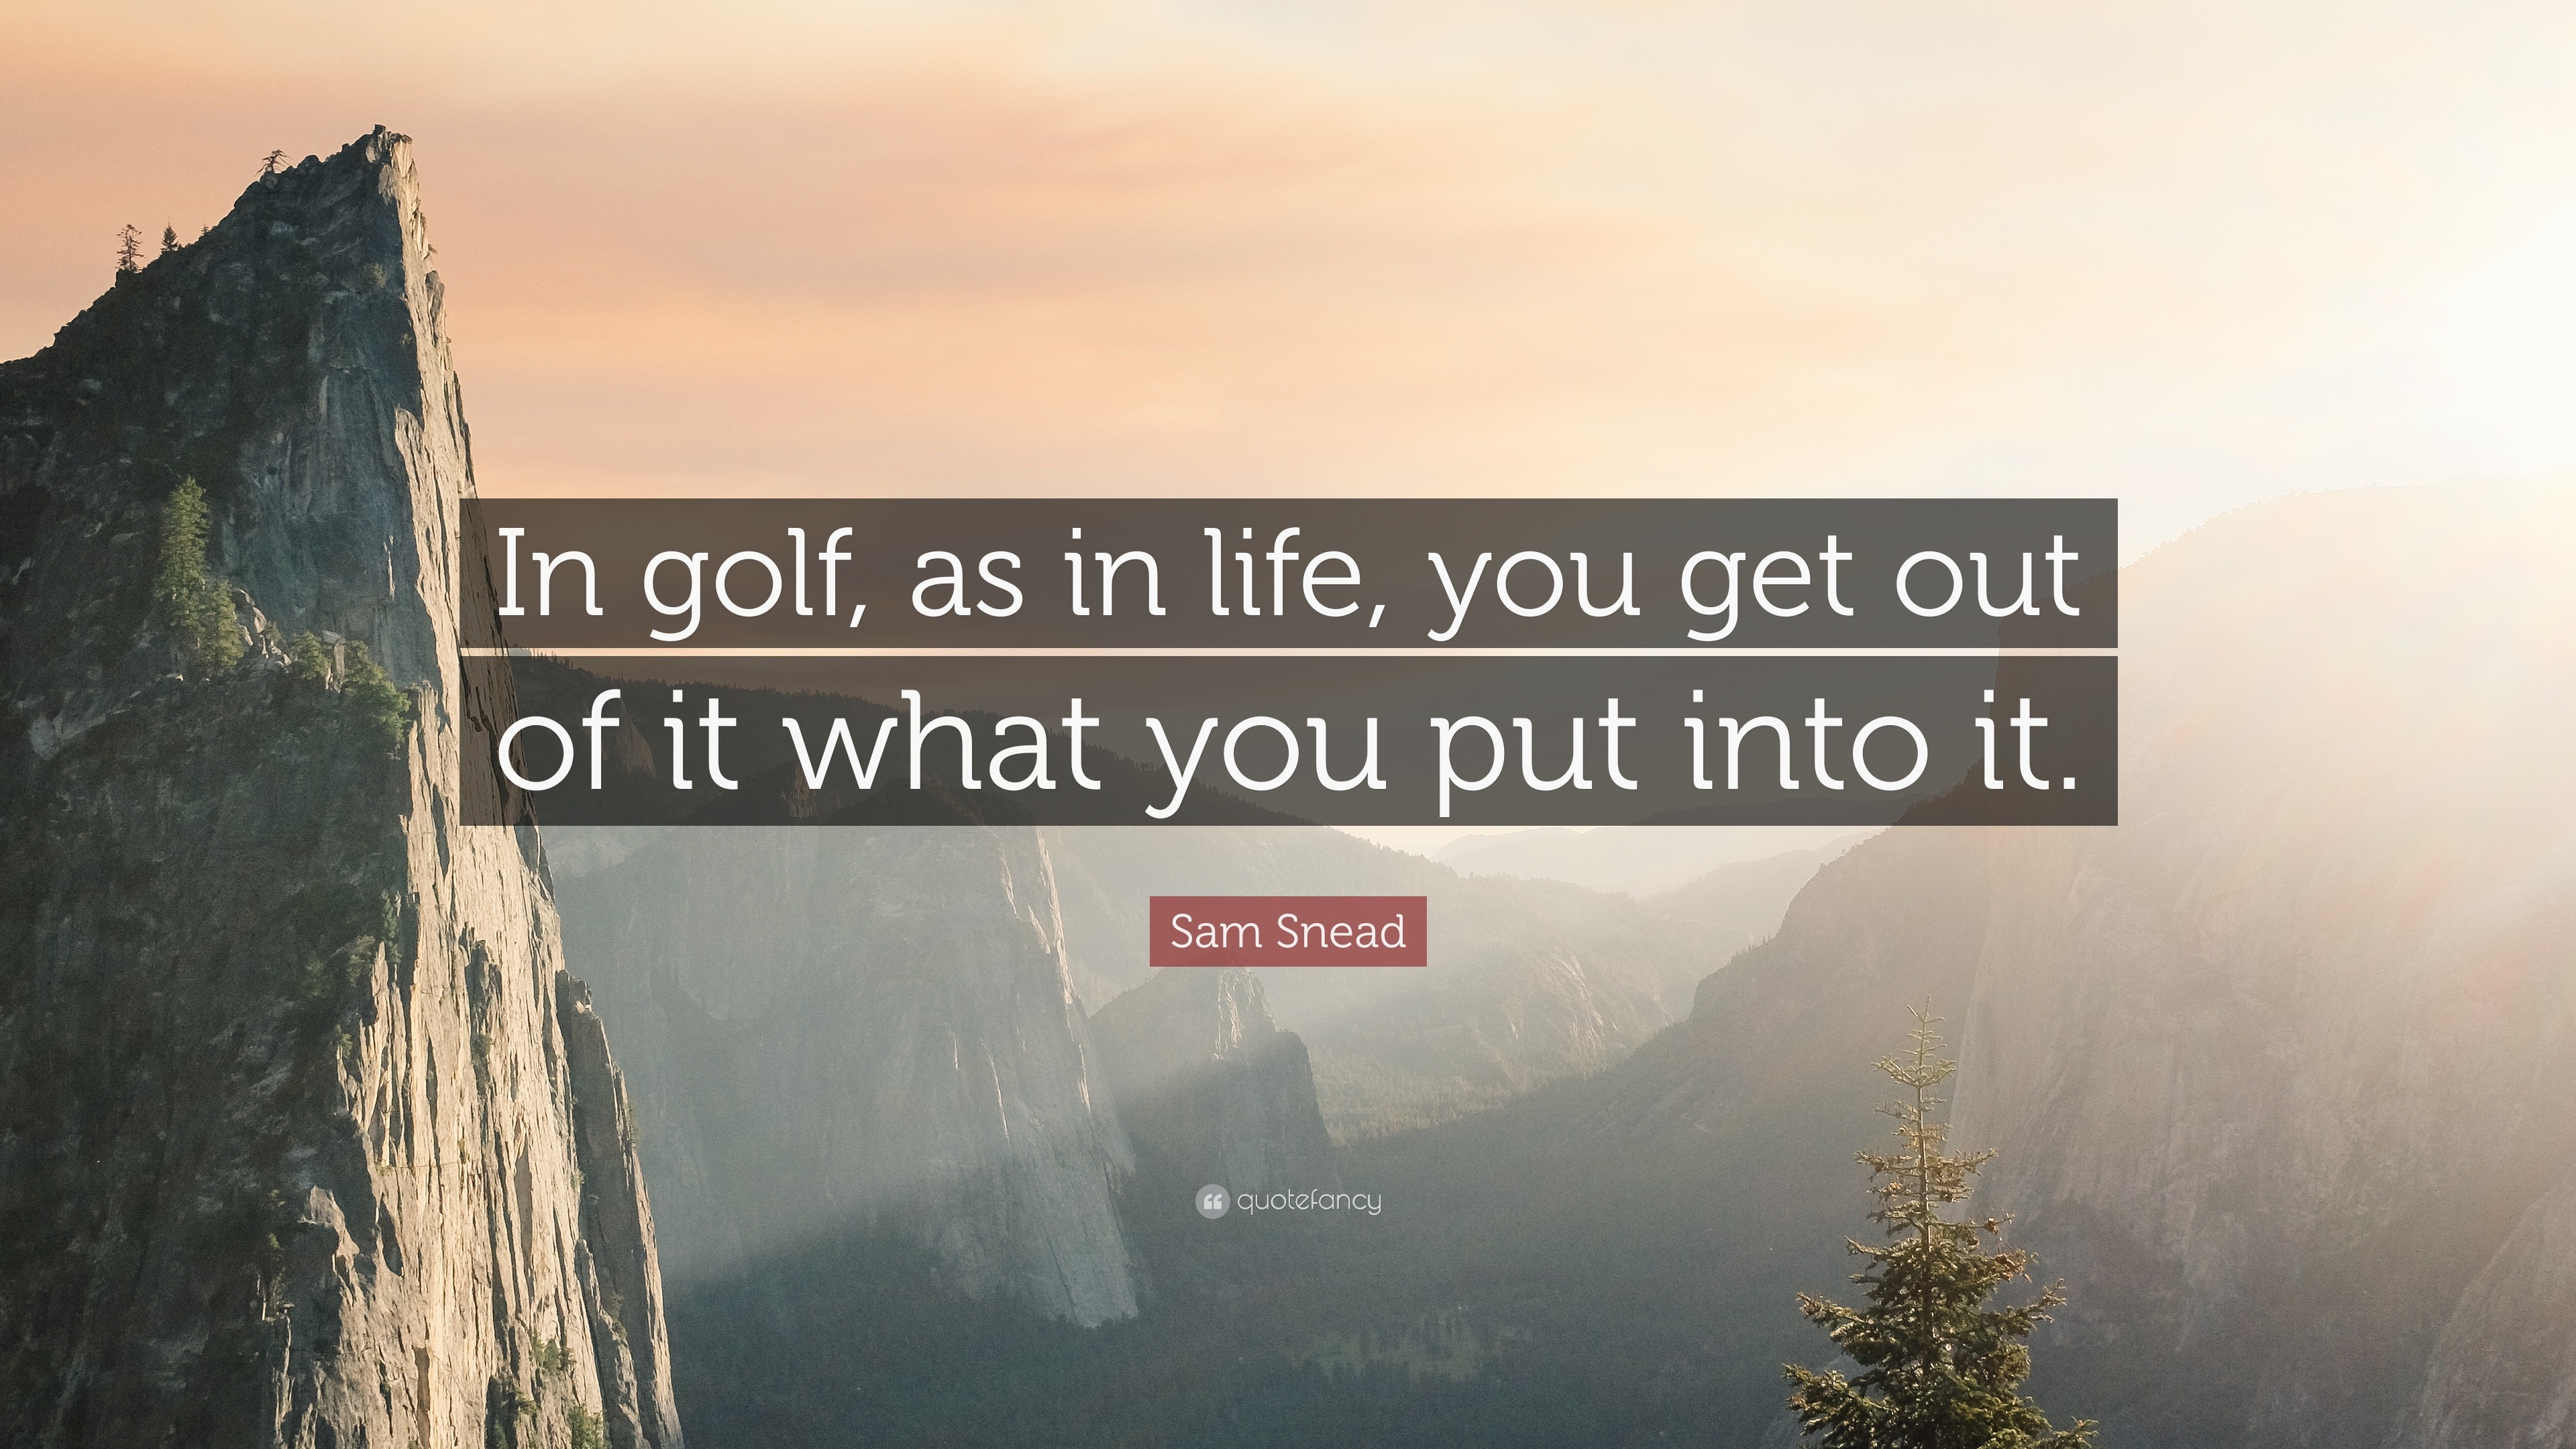 Sam Snead Quotes (54 wallpapers) - Quotefancy